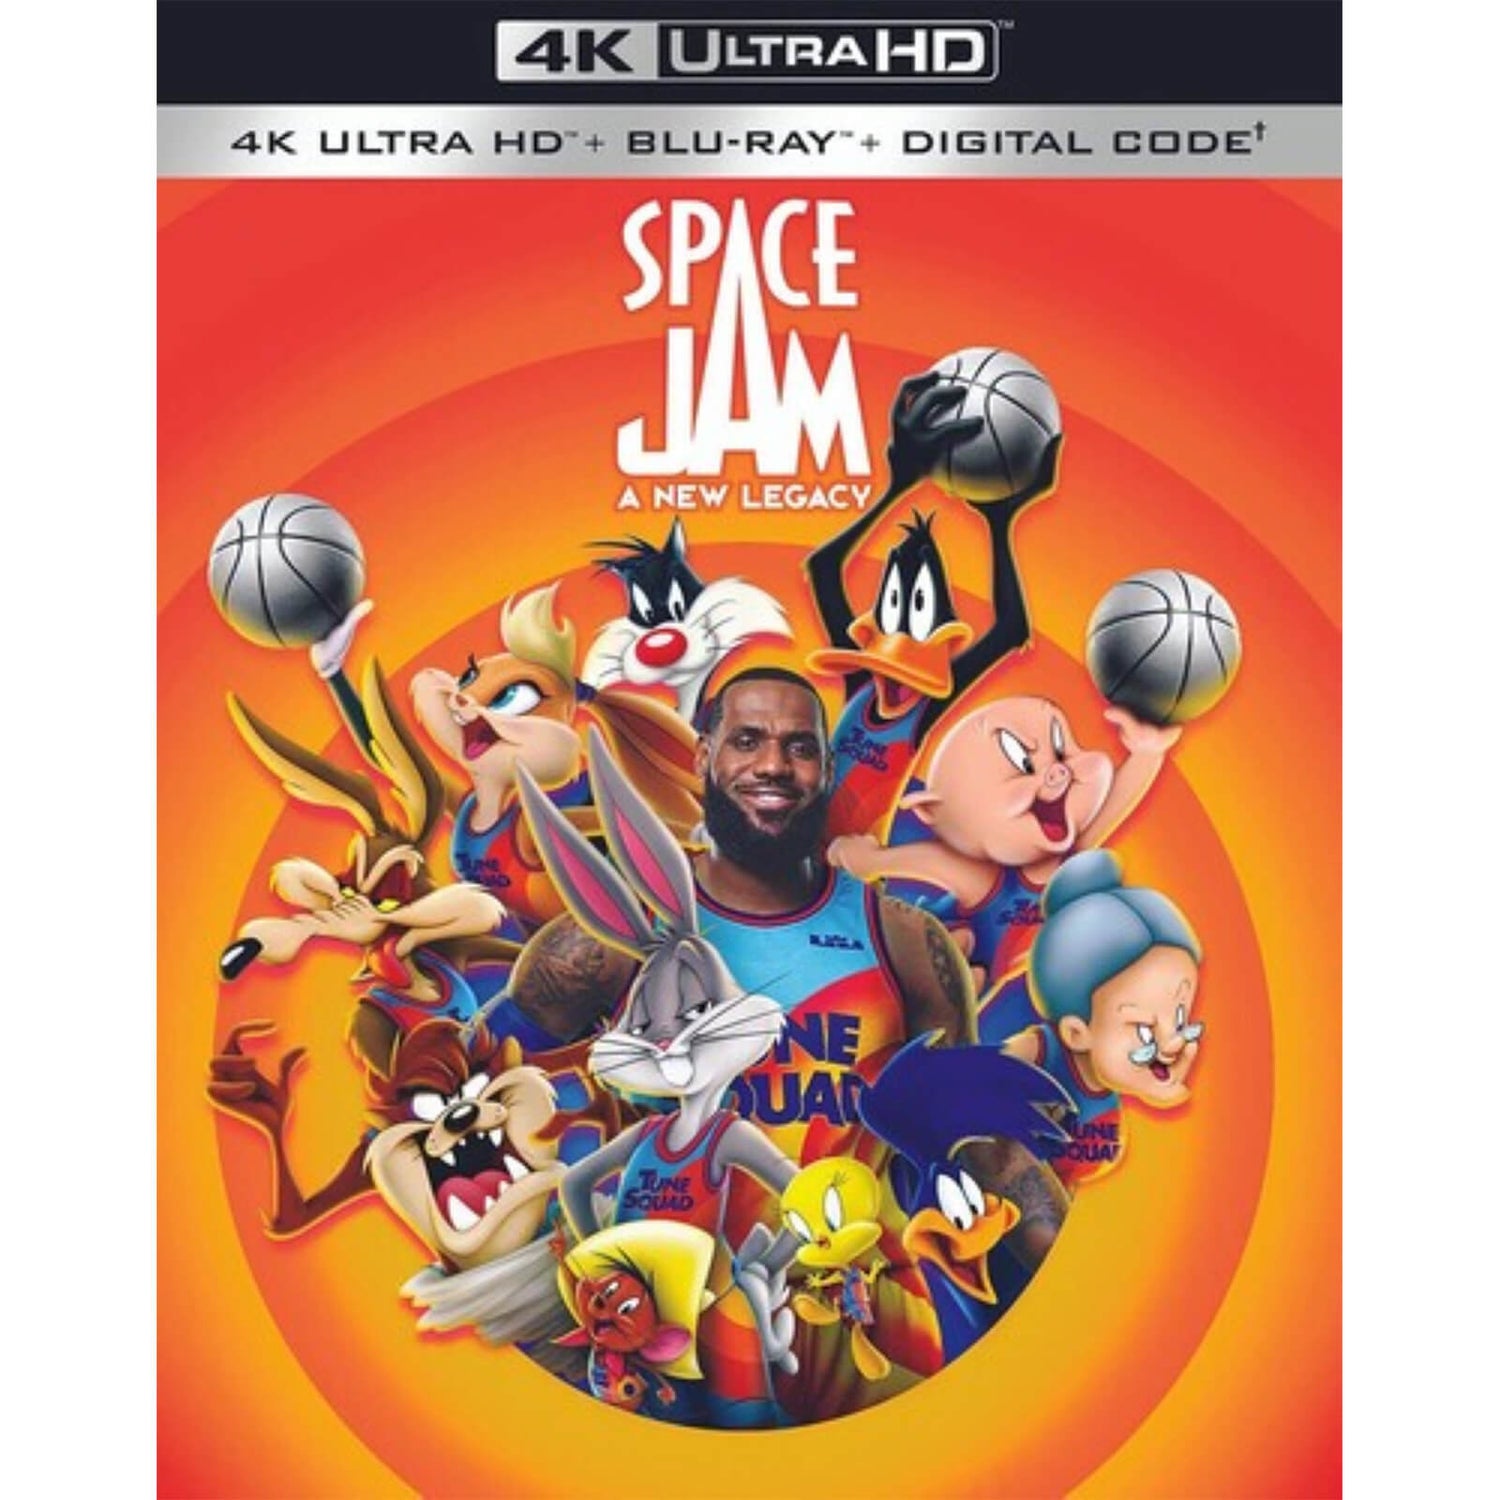 Space Jam: A New Legacy - 4K Ultra HD (Includes Blu-ray) (US Import)